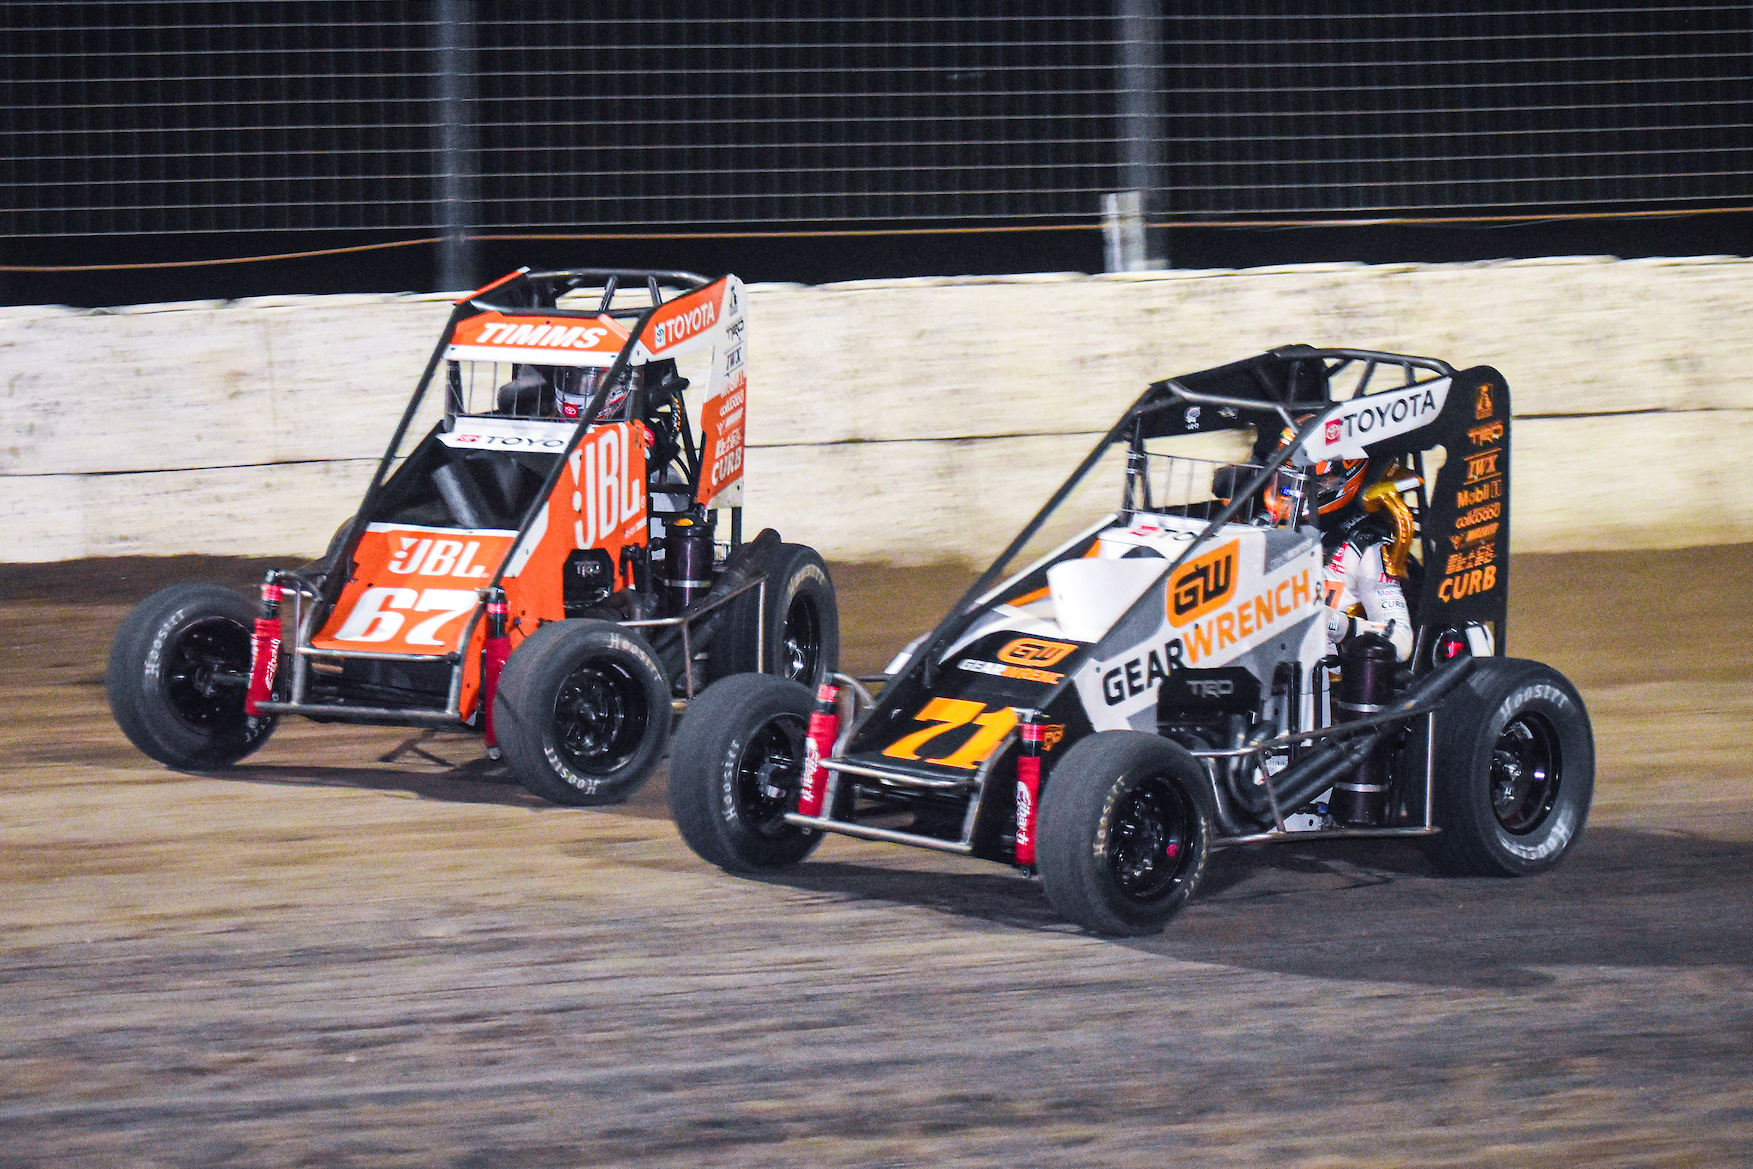 POINTS UPDATE: McIntosh Grows Lead to 74 over Timms After Win at 81 Speedway